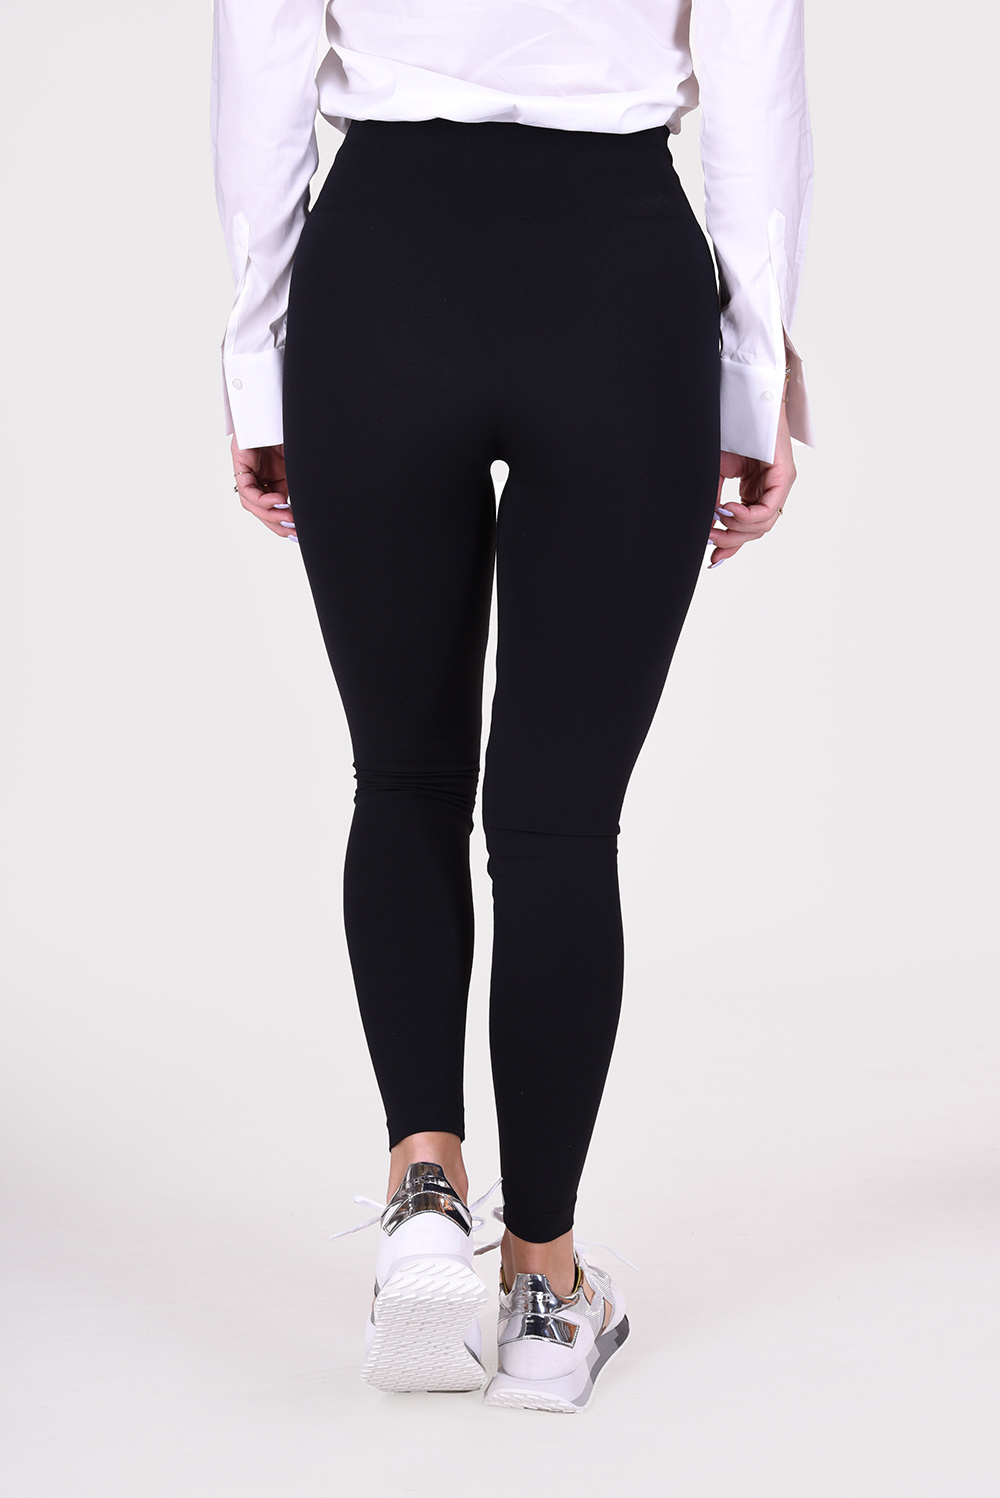 Wolford pants Perfect Fit 14554 black - Marjon Snieders